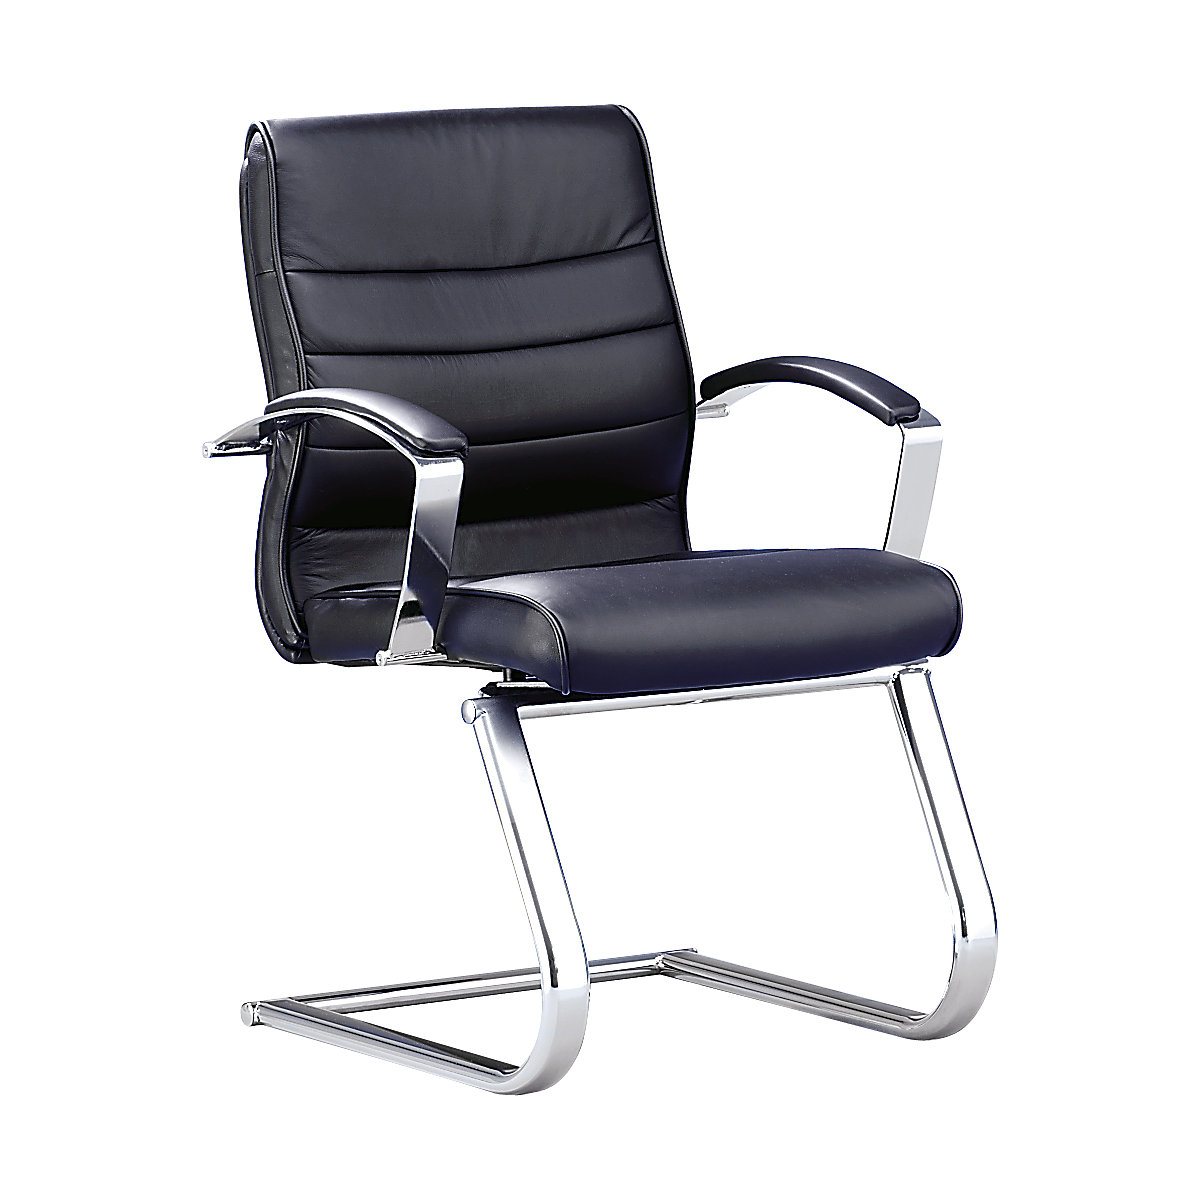 Visitor's easy chair - Topstar